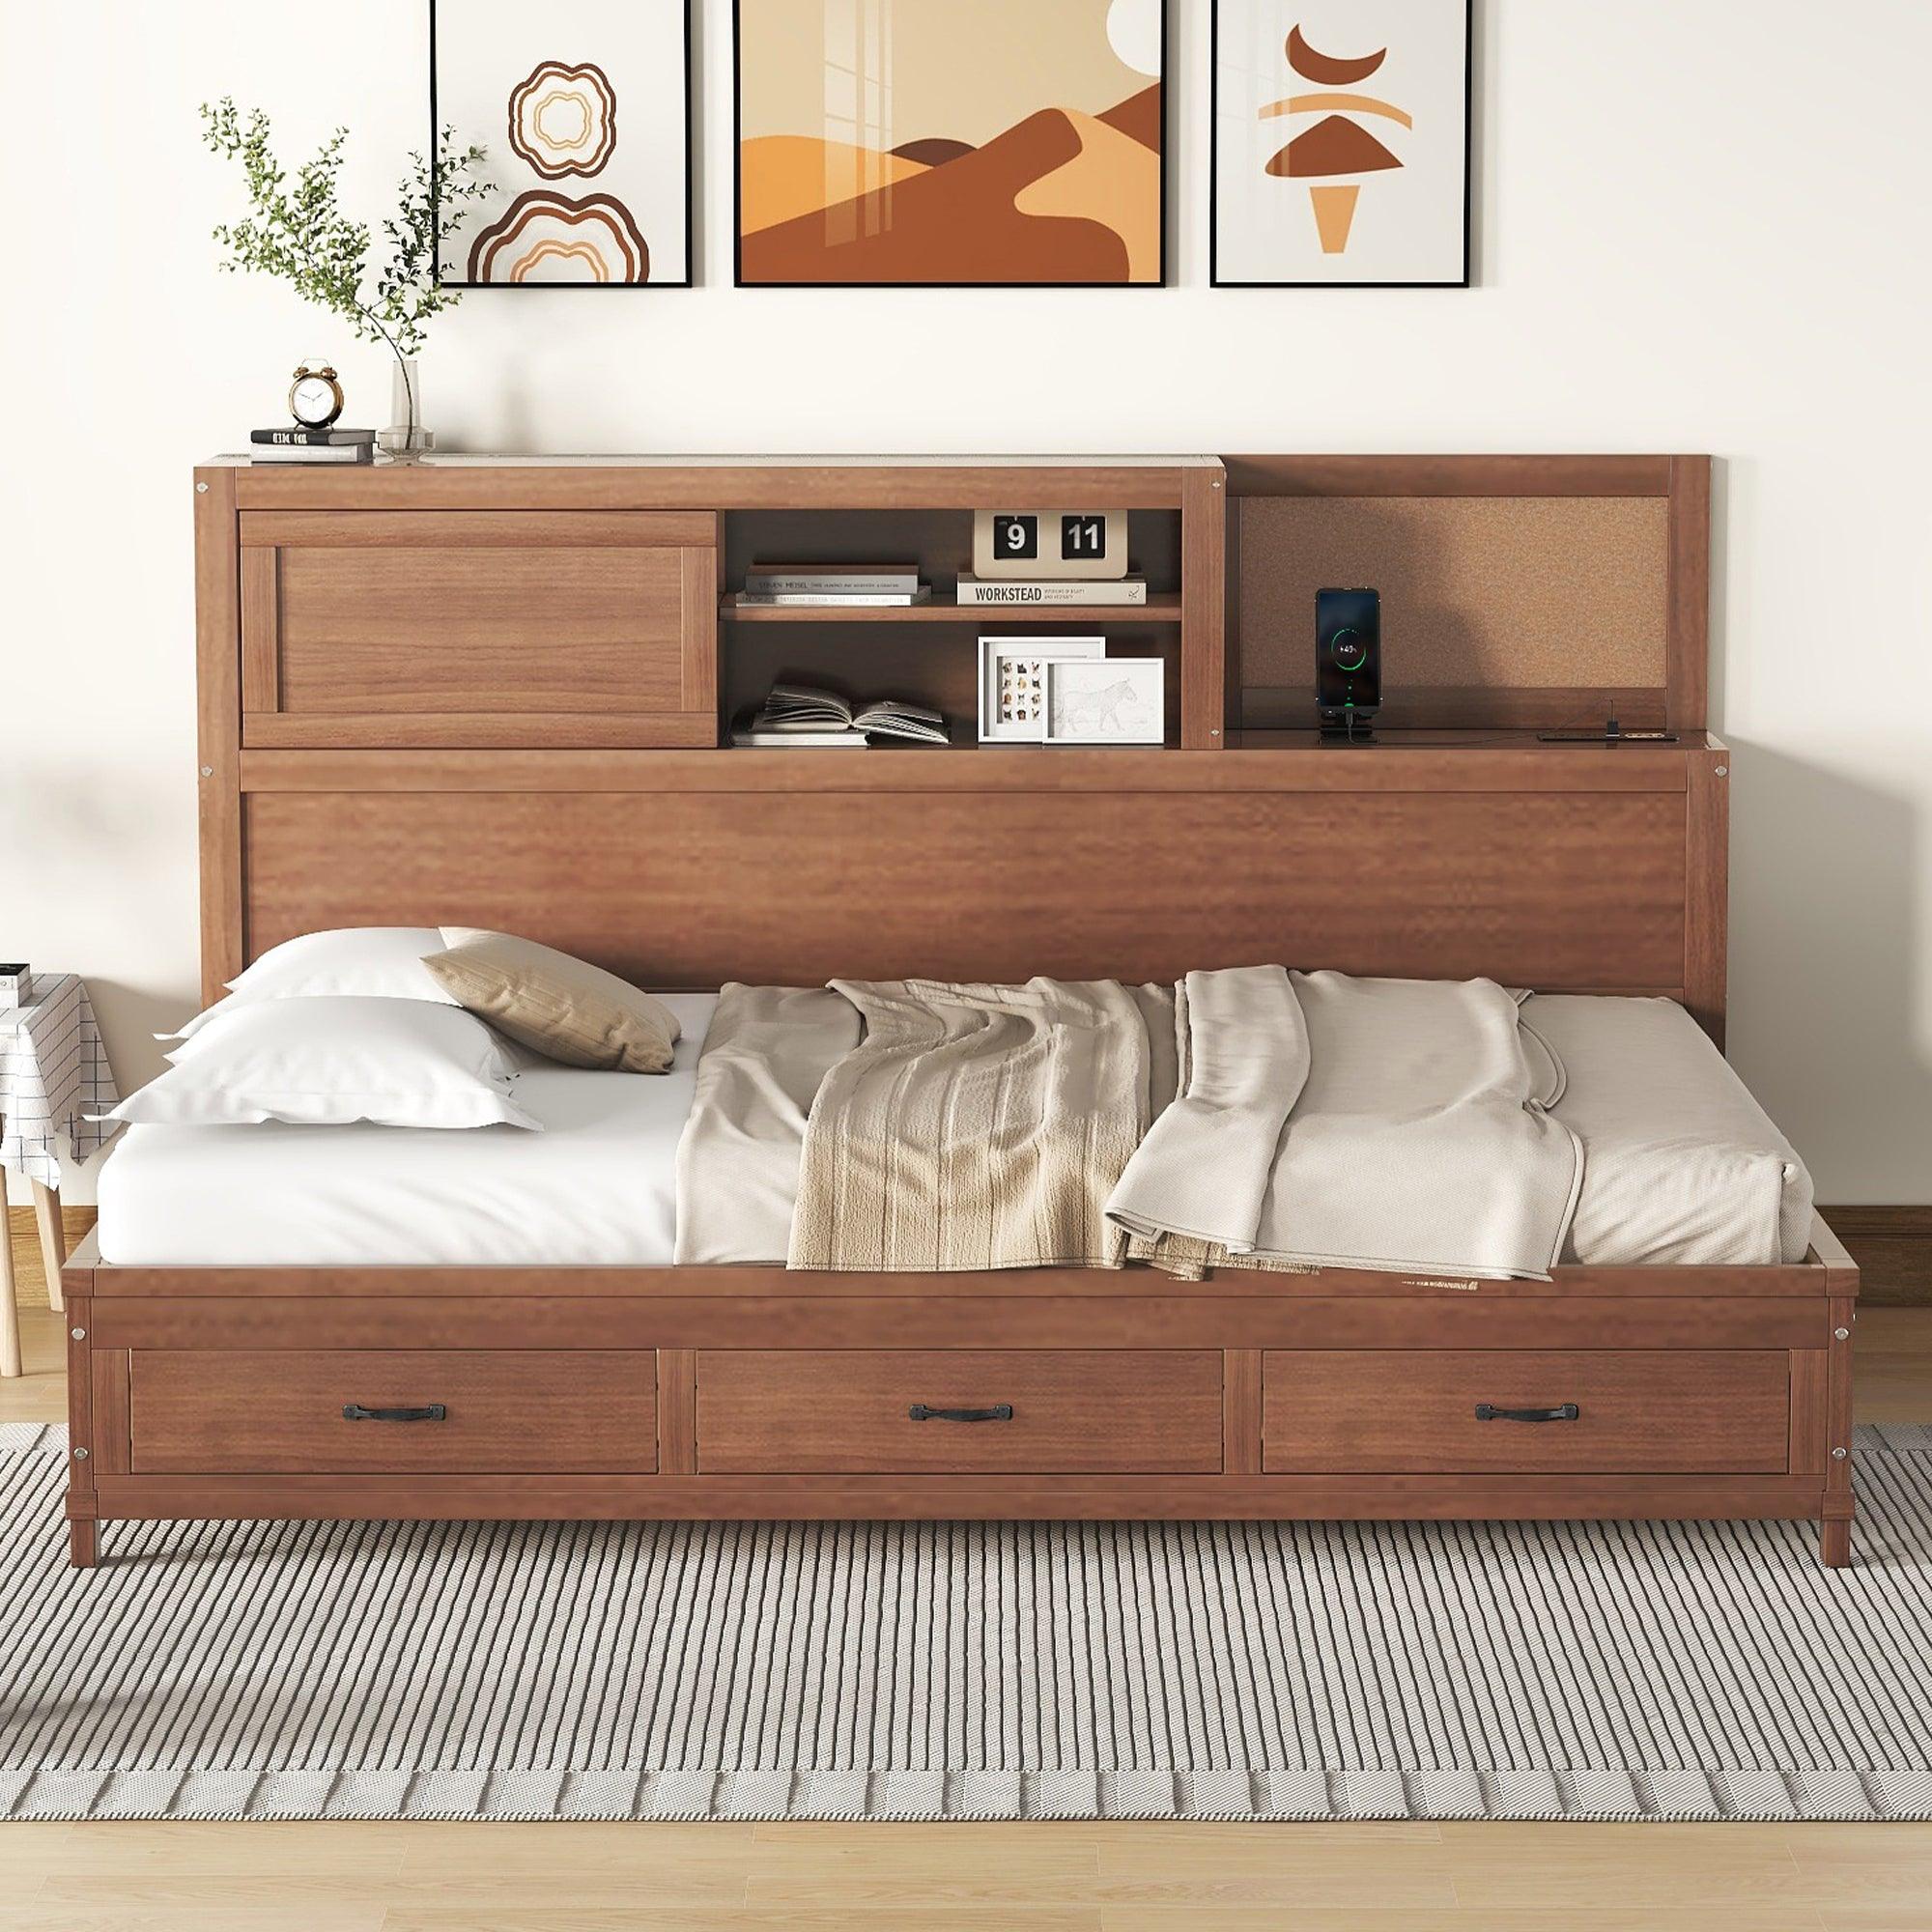 🆓🚛 Full Size Wooden Daybed With 3 Storage Drawers, Upper Soft Board, Shelf, Set Of Sockets & Usb Ports, Brown